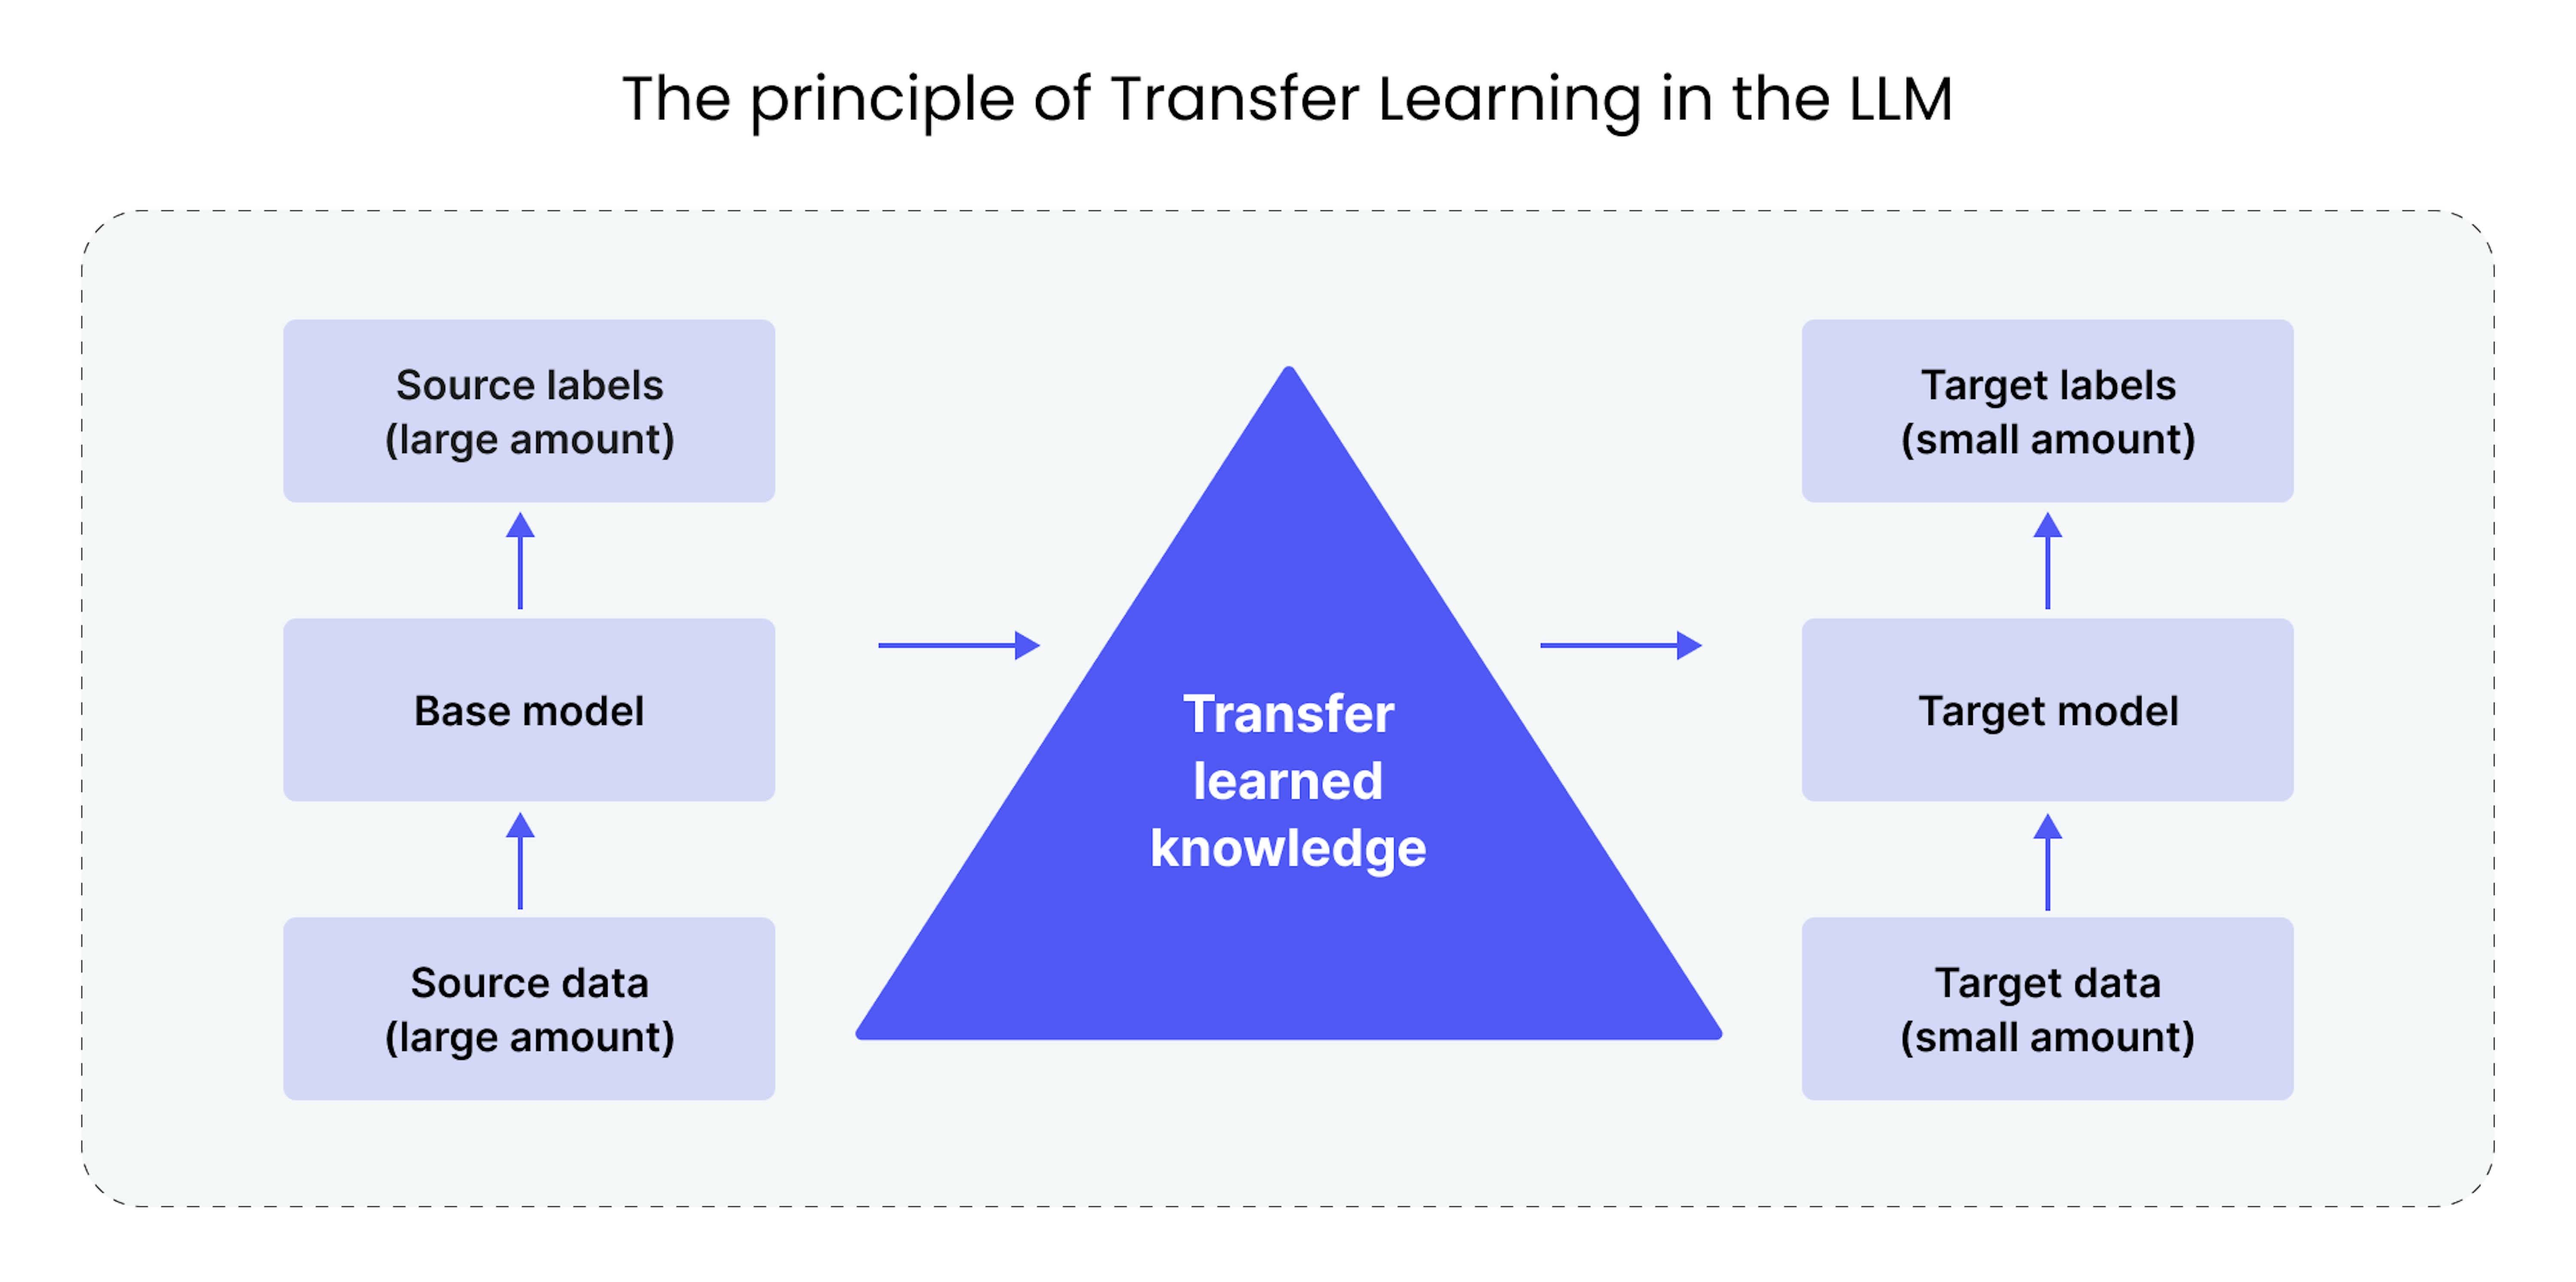 The principle of Transfer Learning in the LLM